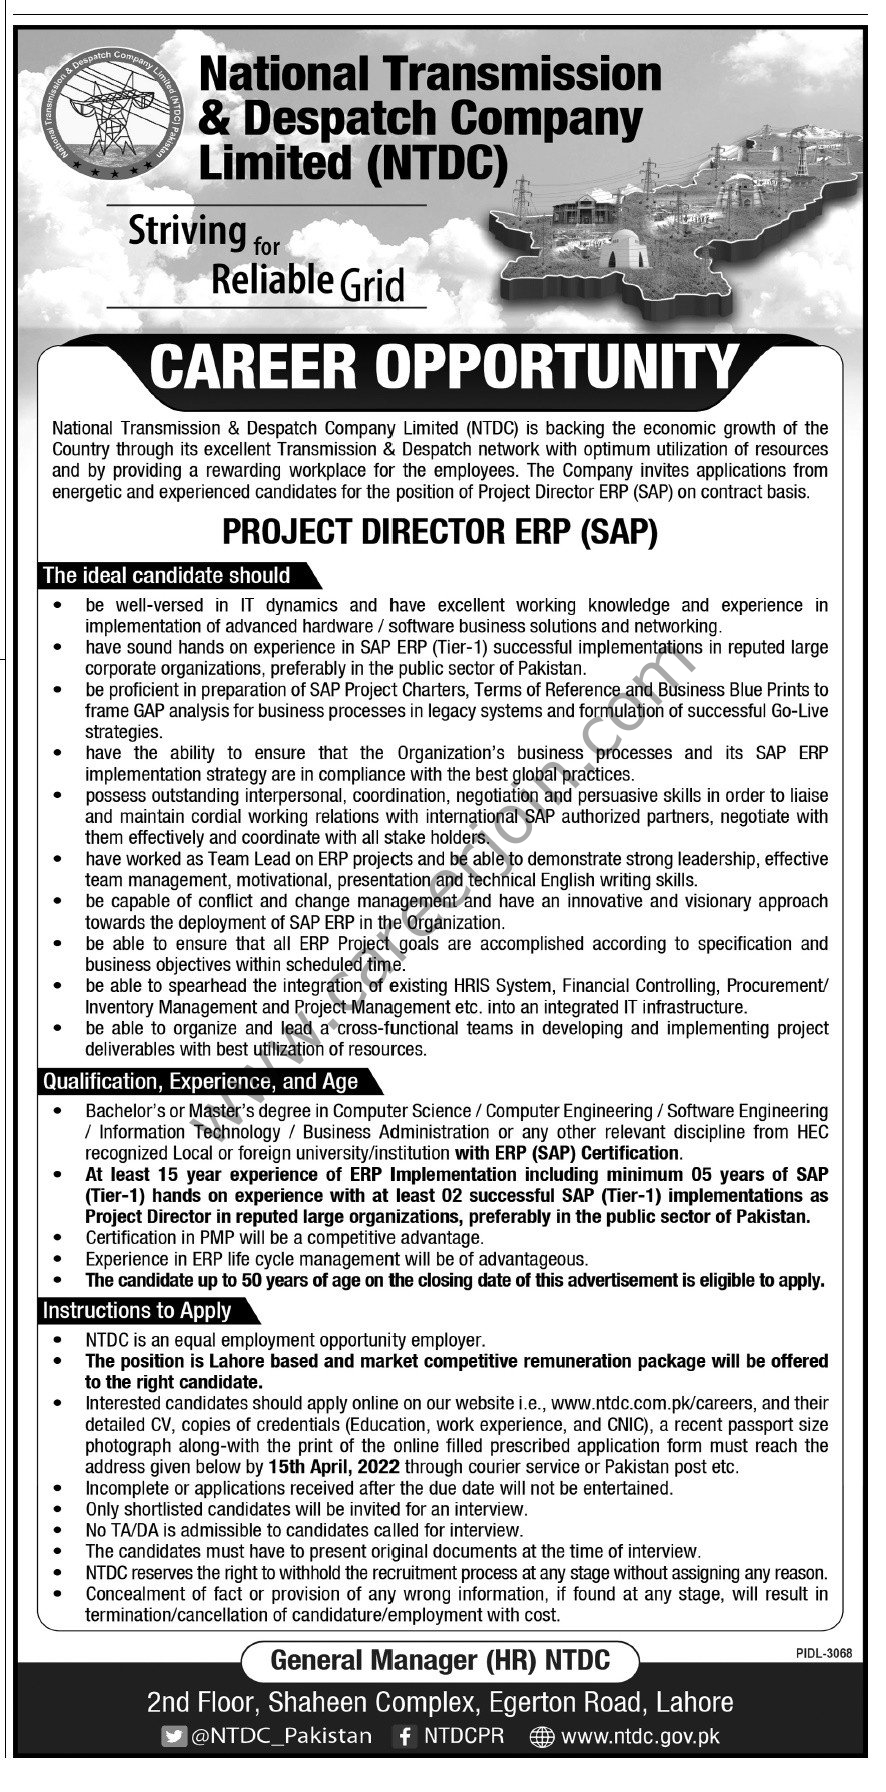 National Transmission and Despatch Company NTDC Jobs 2022